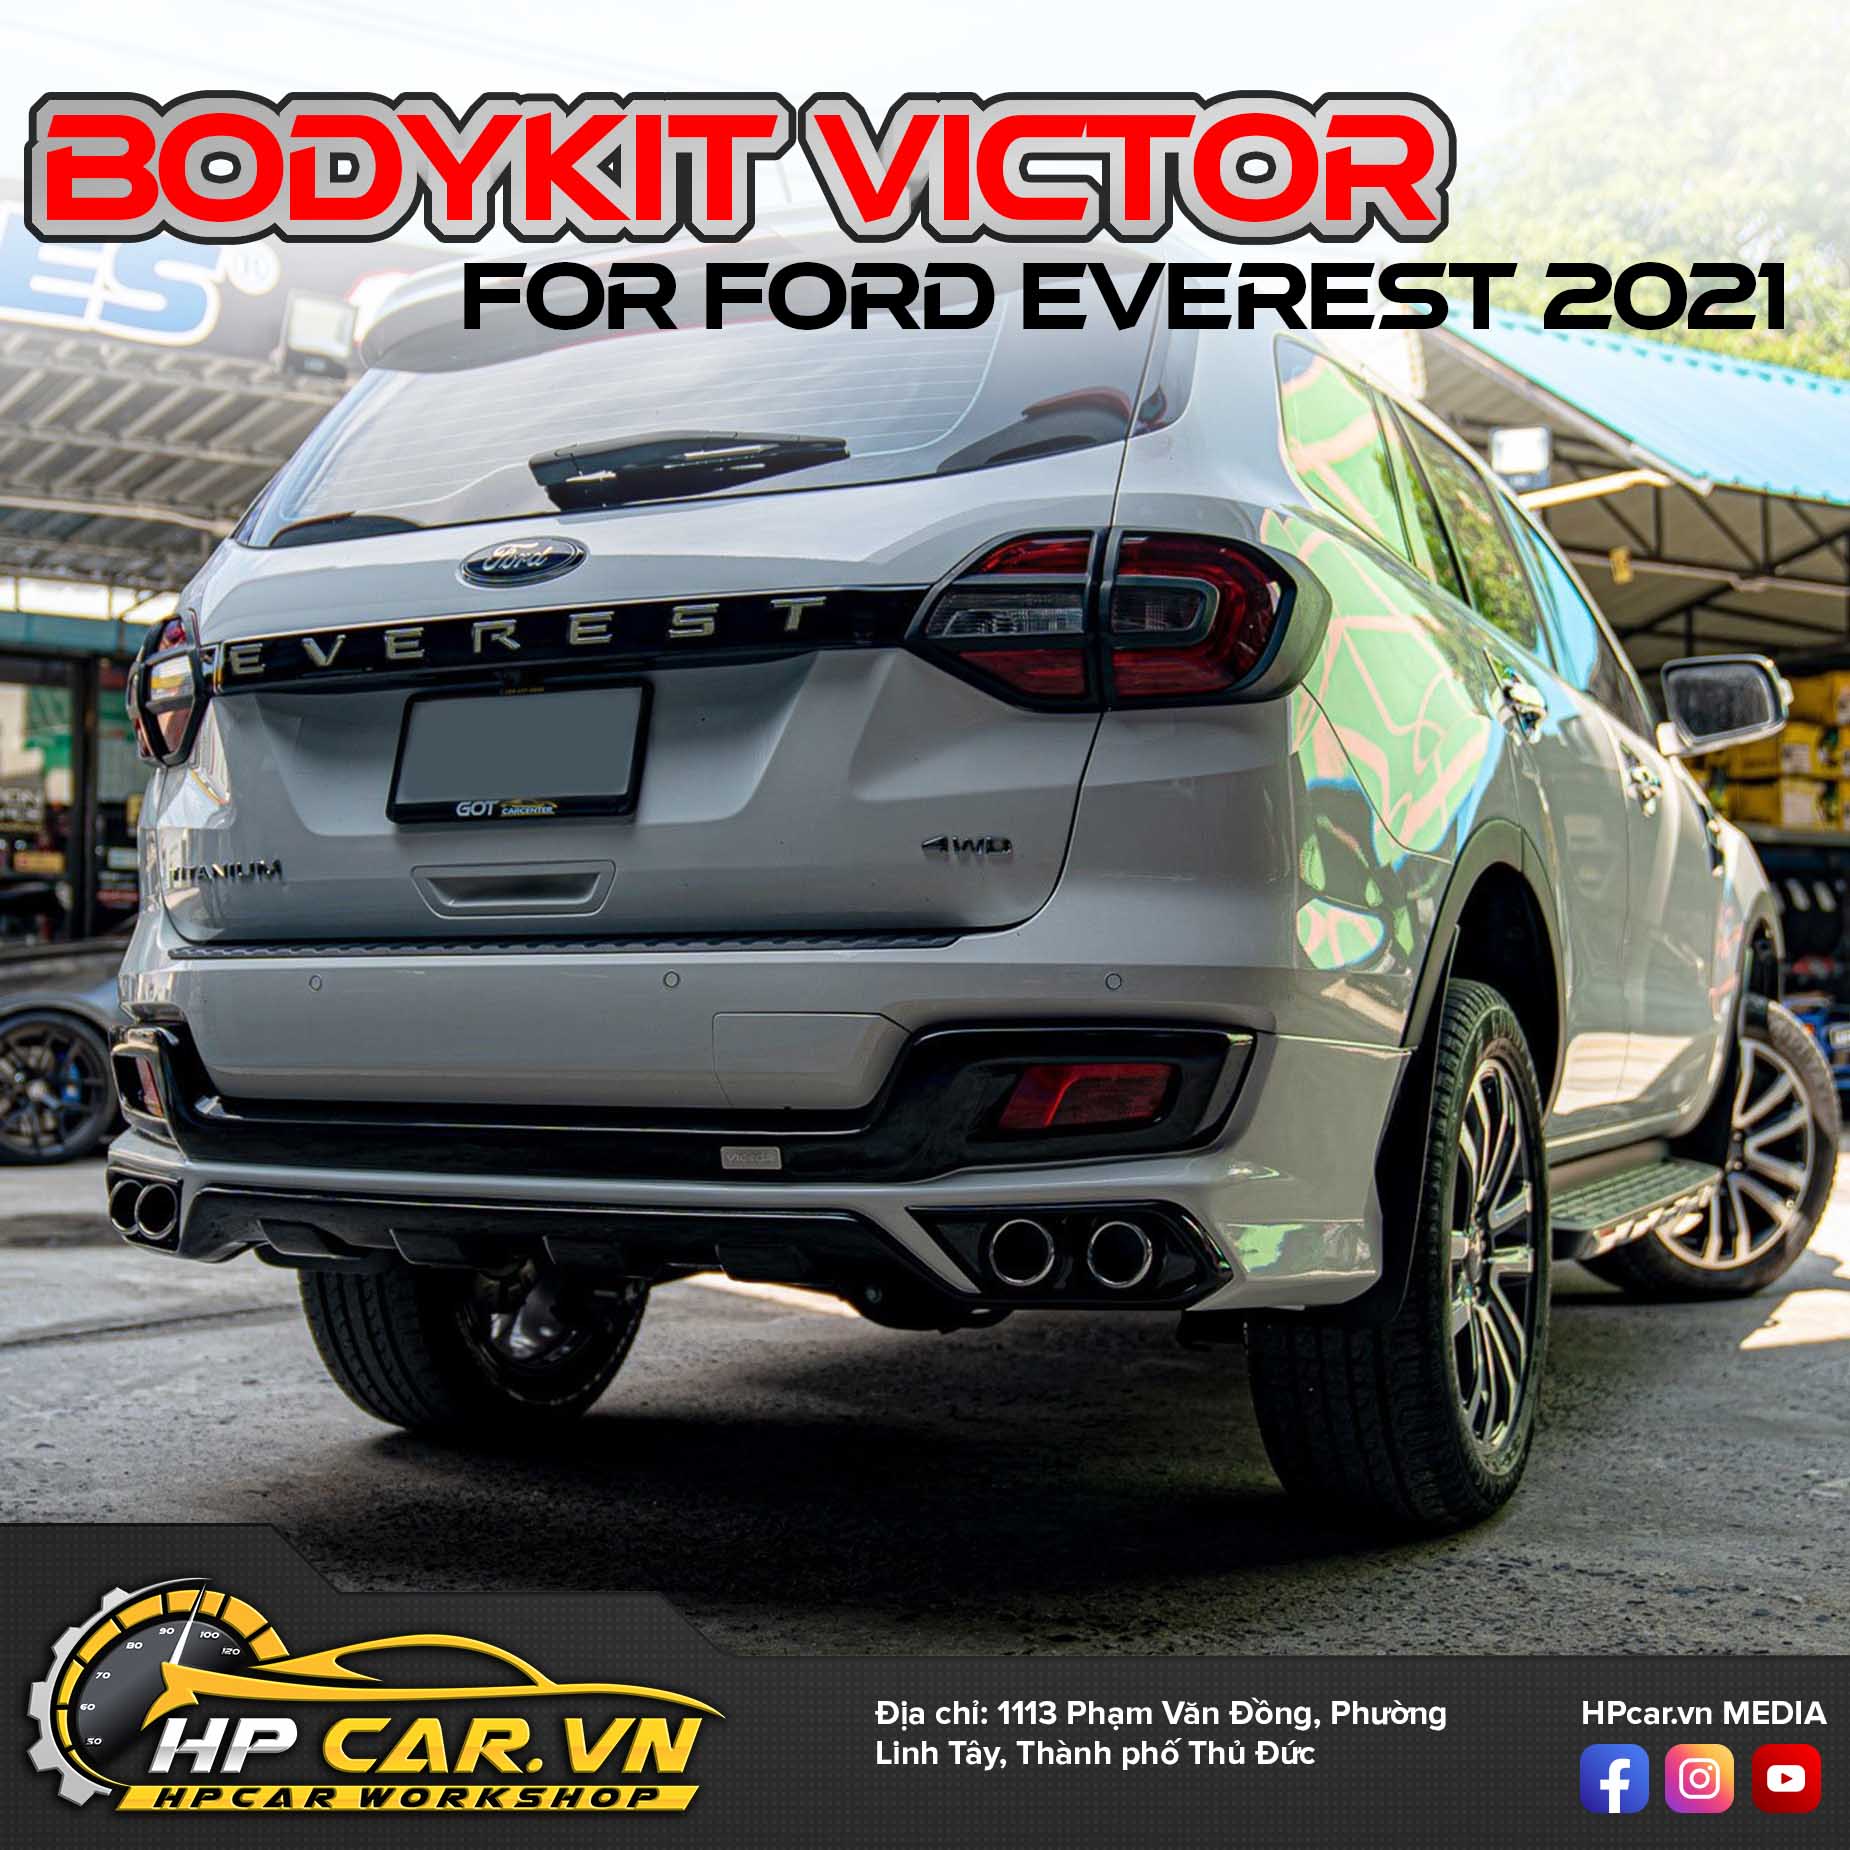 BODYKIT VICTOR FORD EVEREST 2021